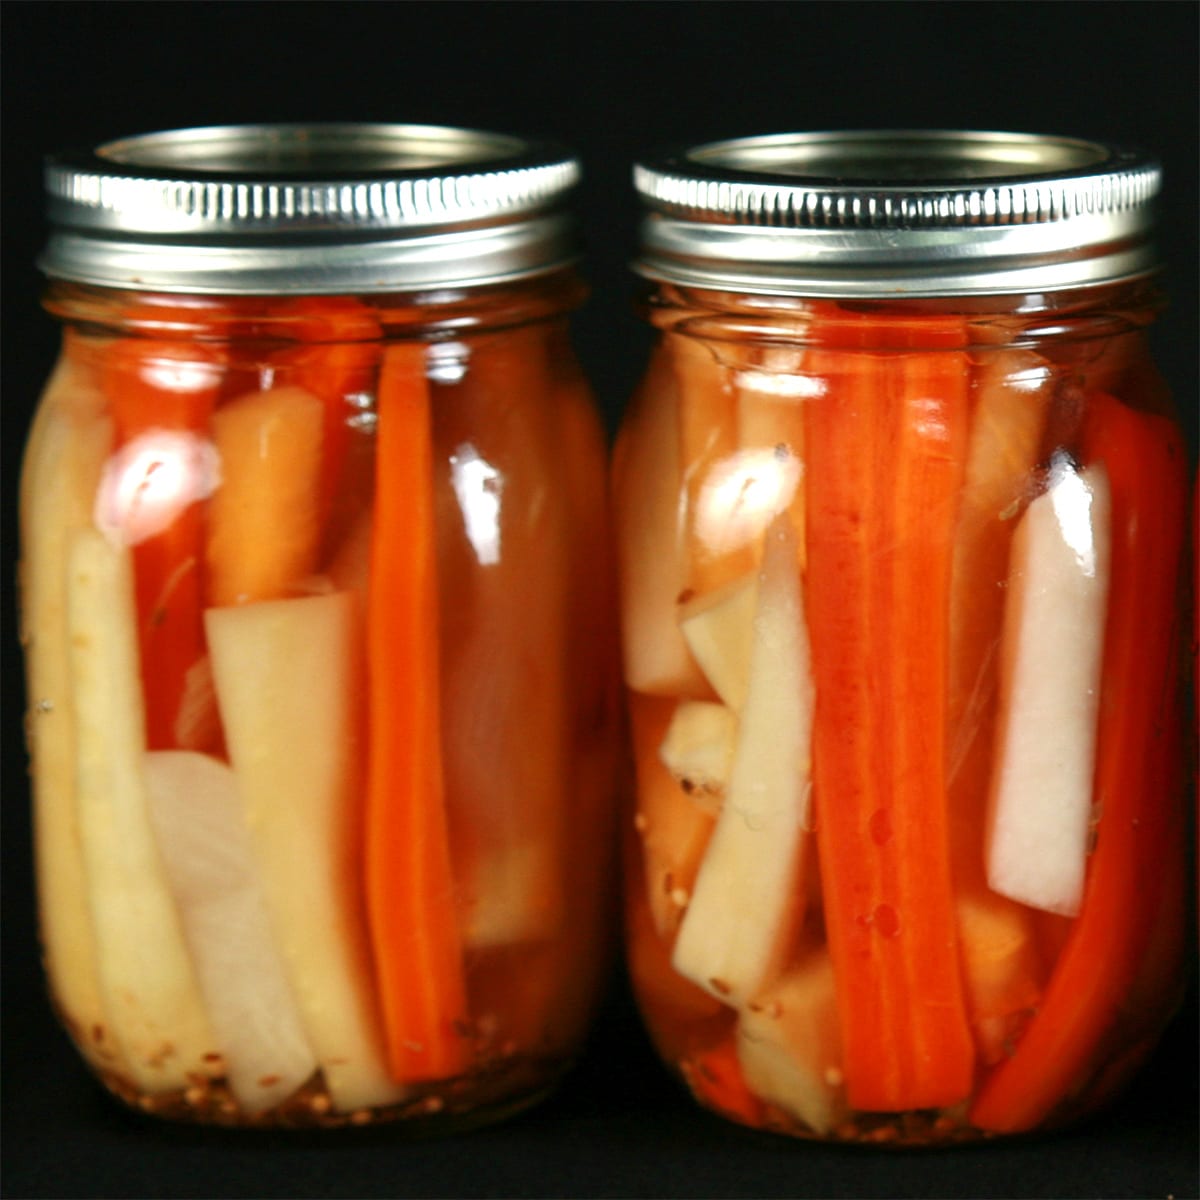 2 jars of mixed root vegetable pickles. Spears of carrot, parsnip, and turnip are visible.